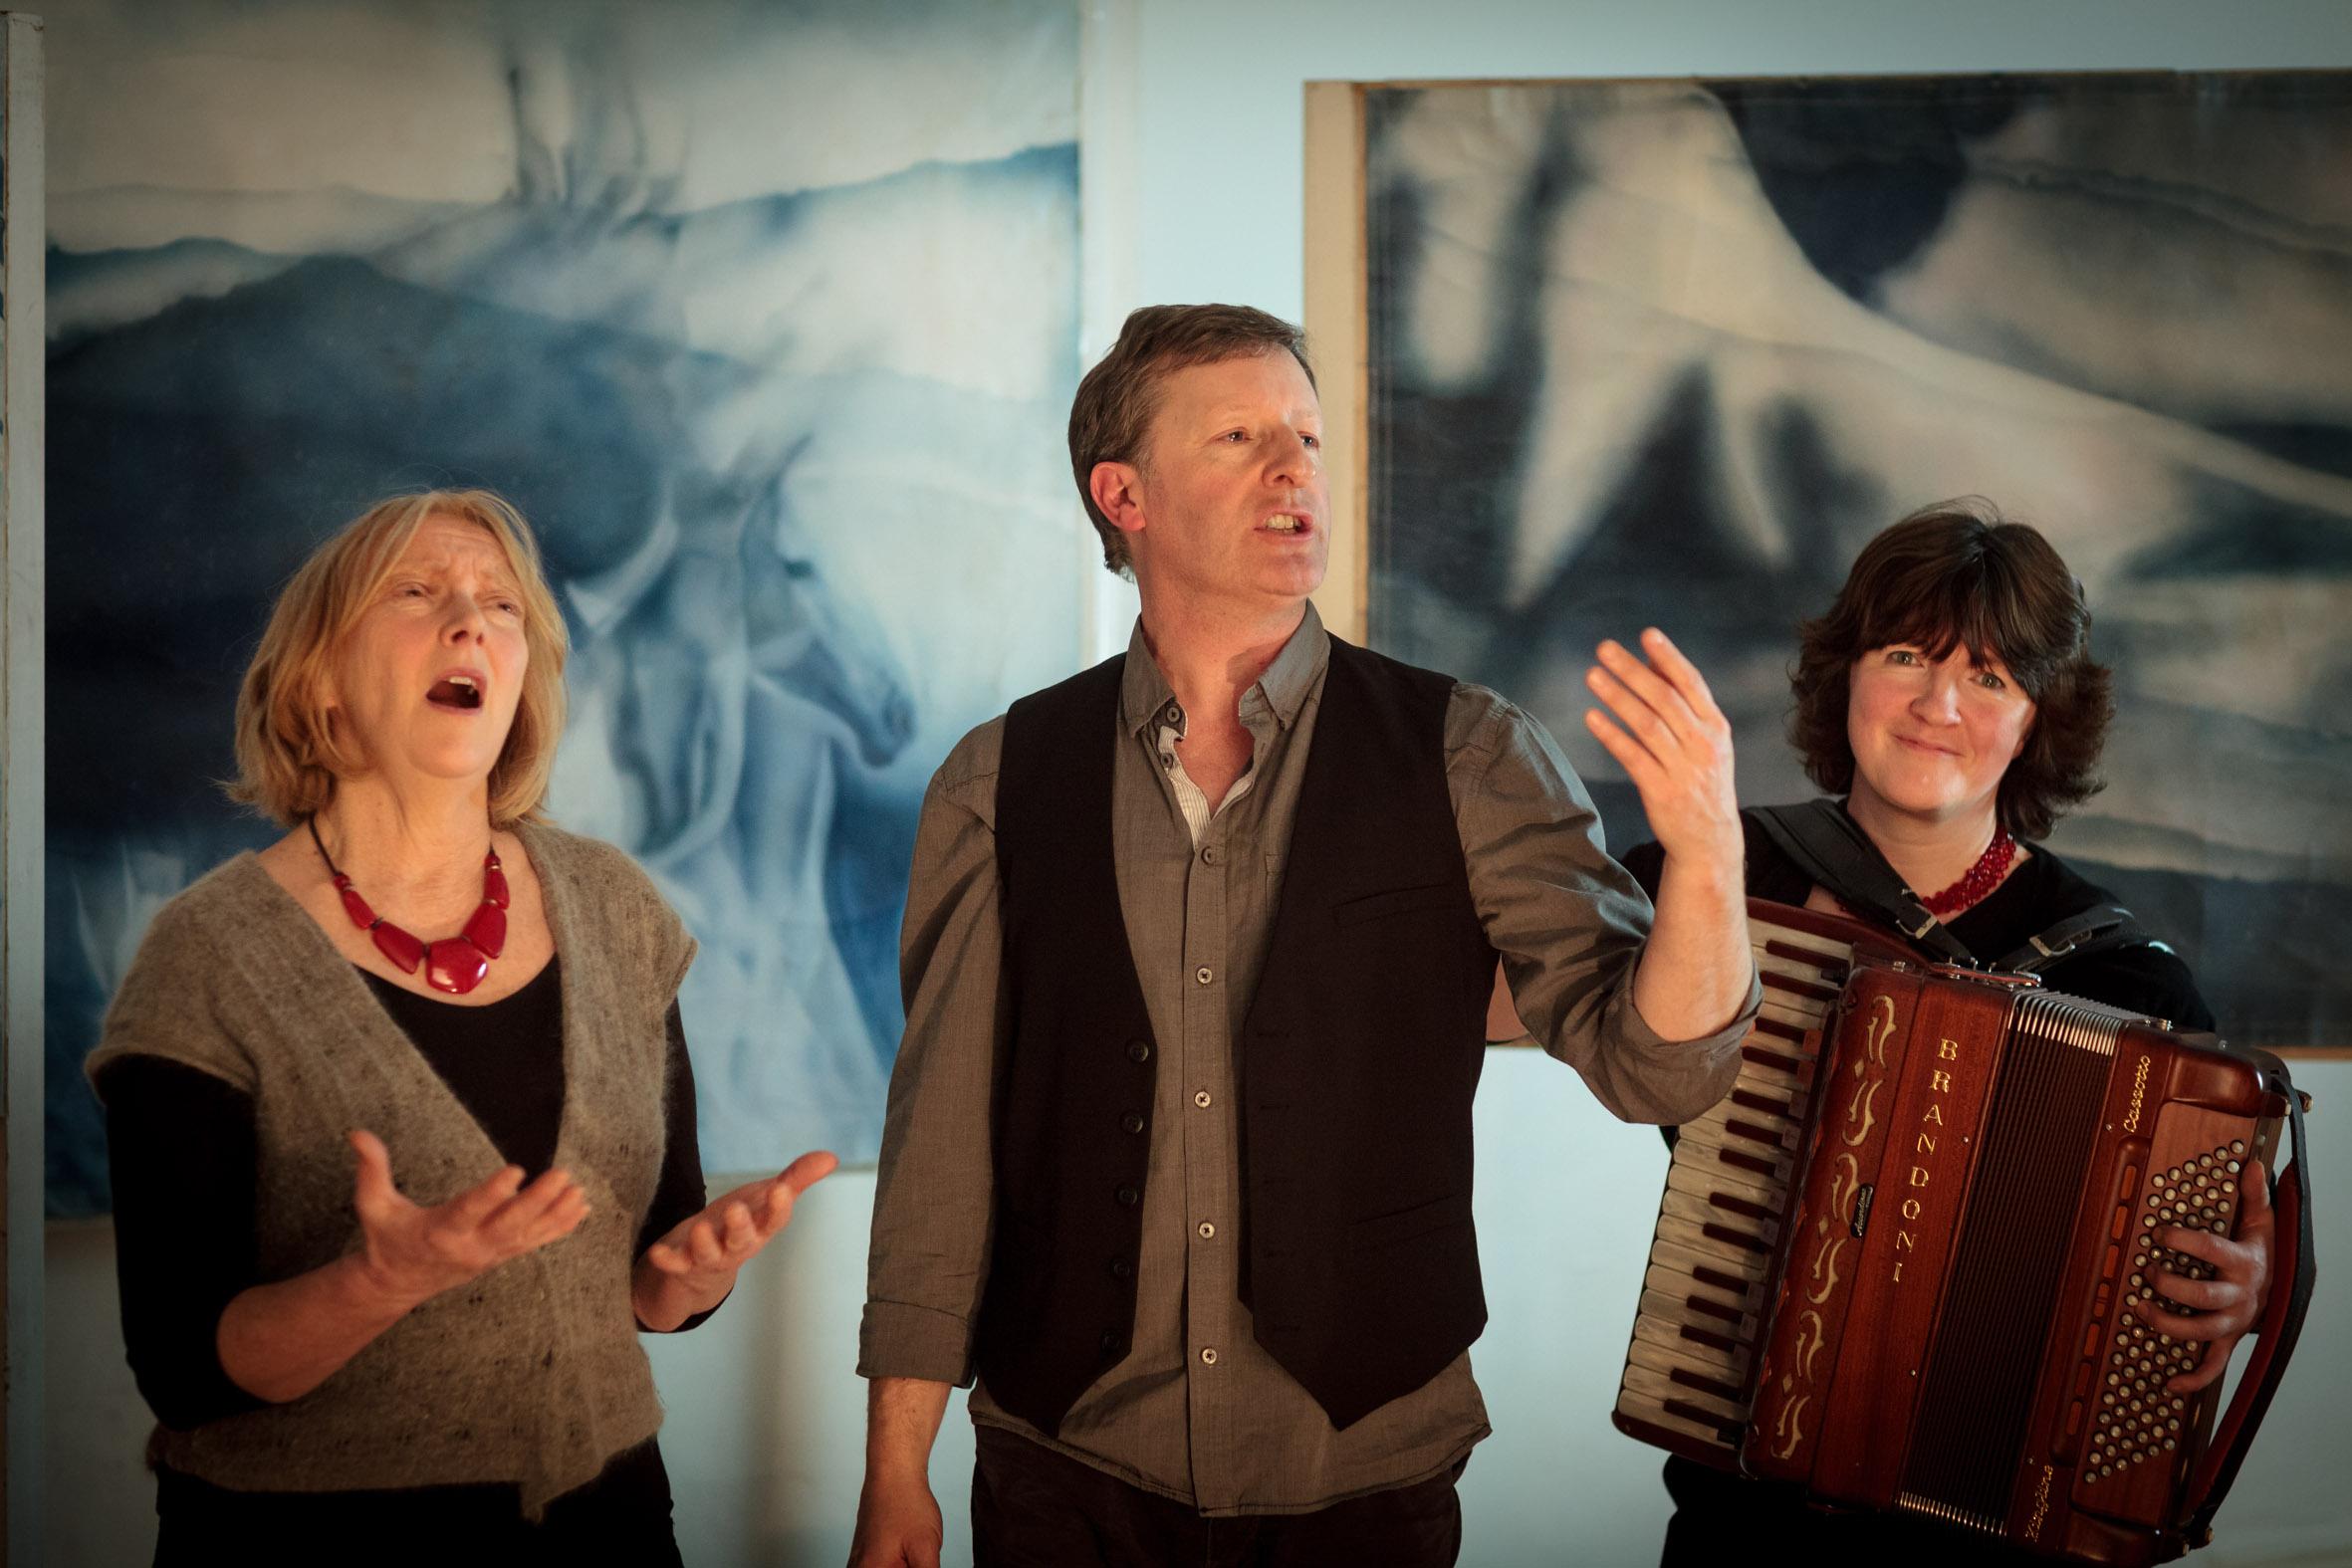 from left to right - Lynne Denman, Michael Harvey and Stacey Blythe in an ensemble shot in front of a large blue backdrop